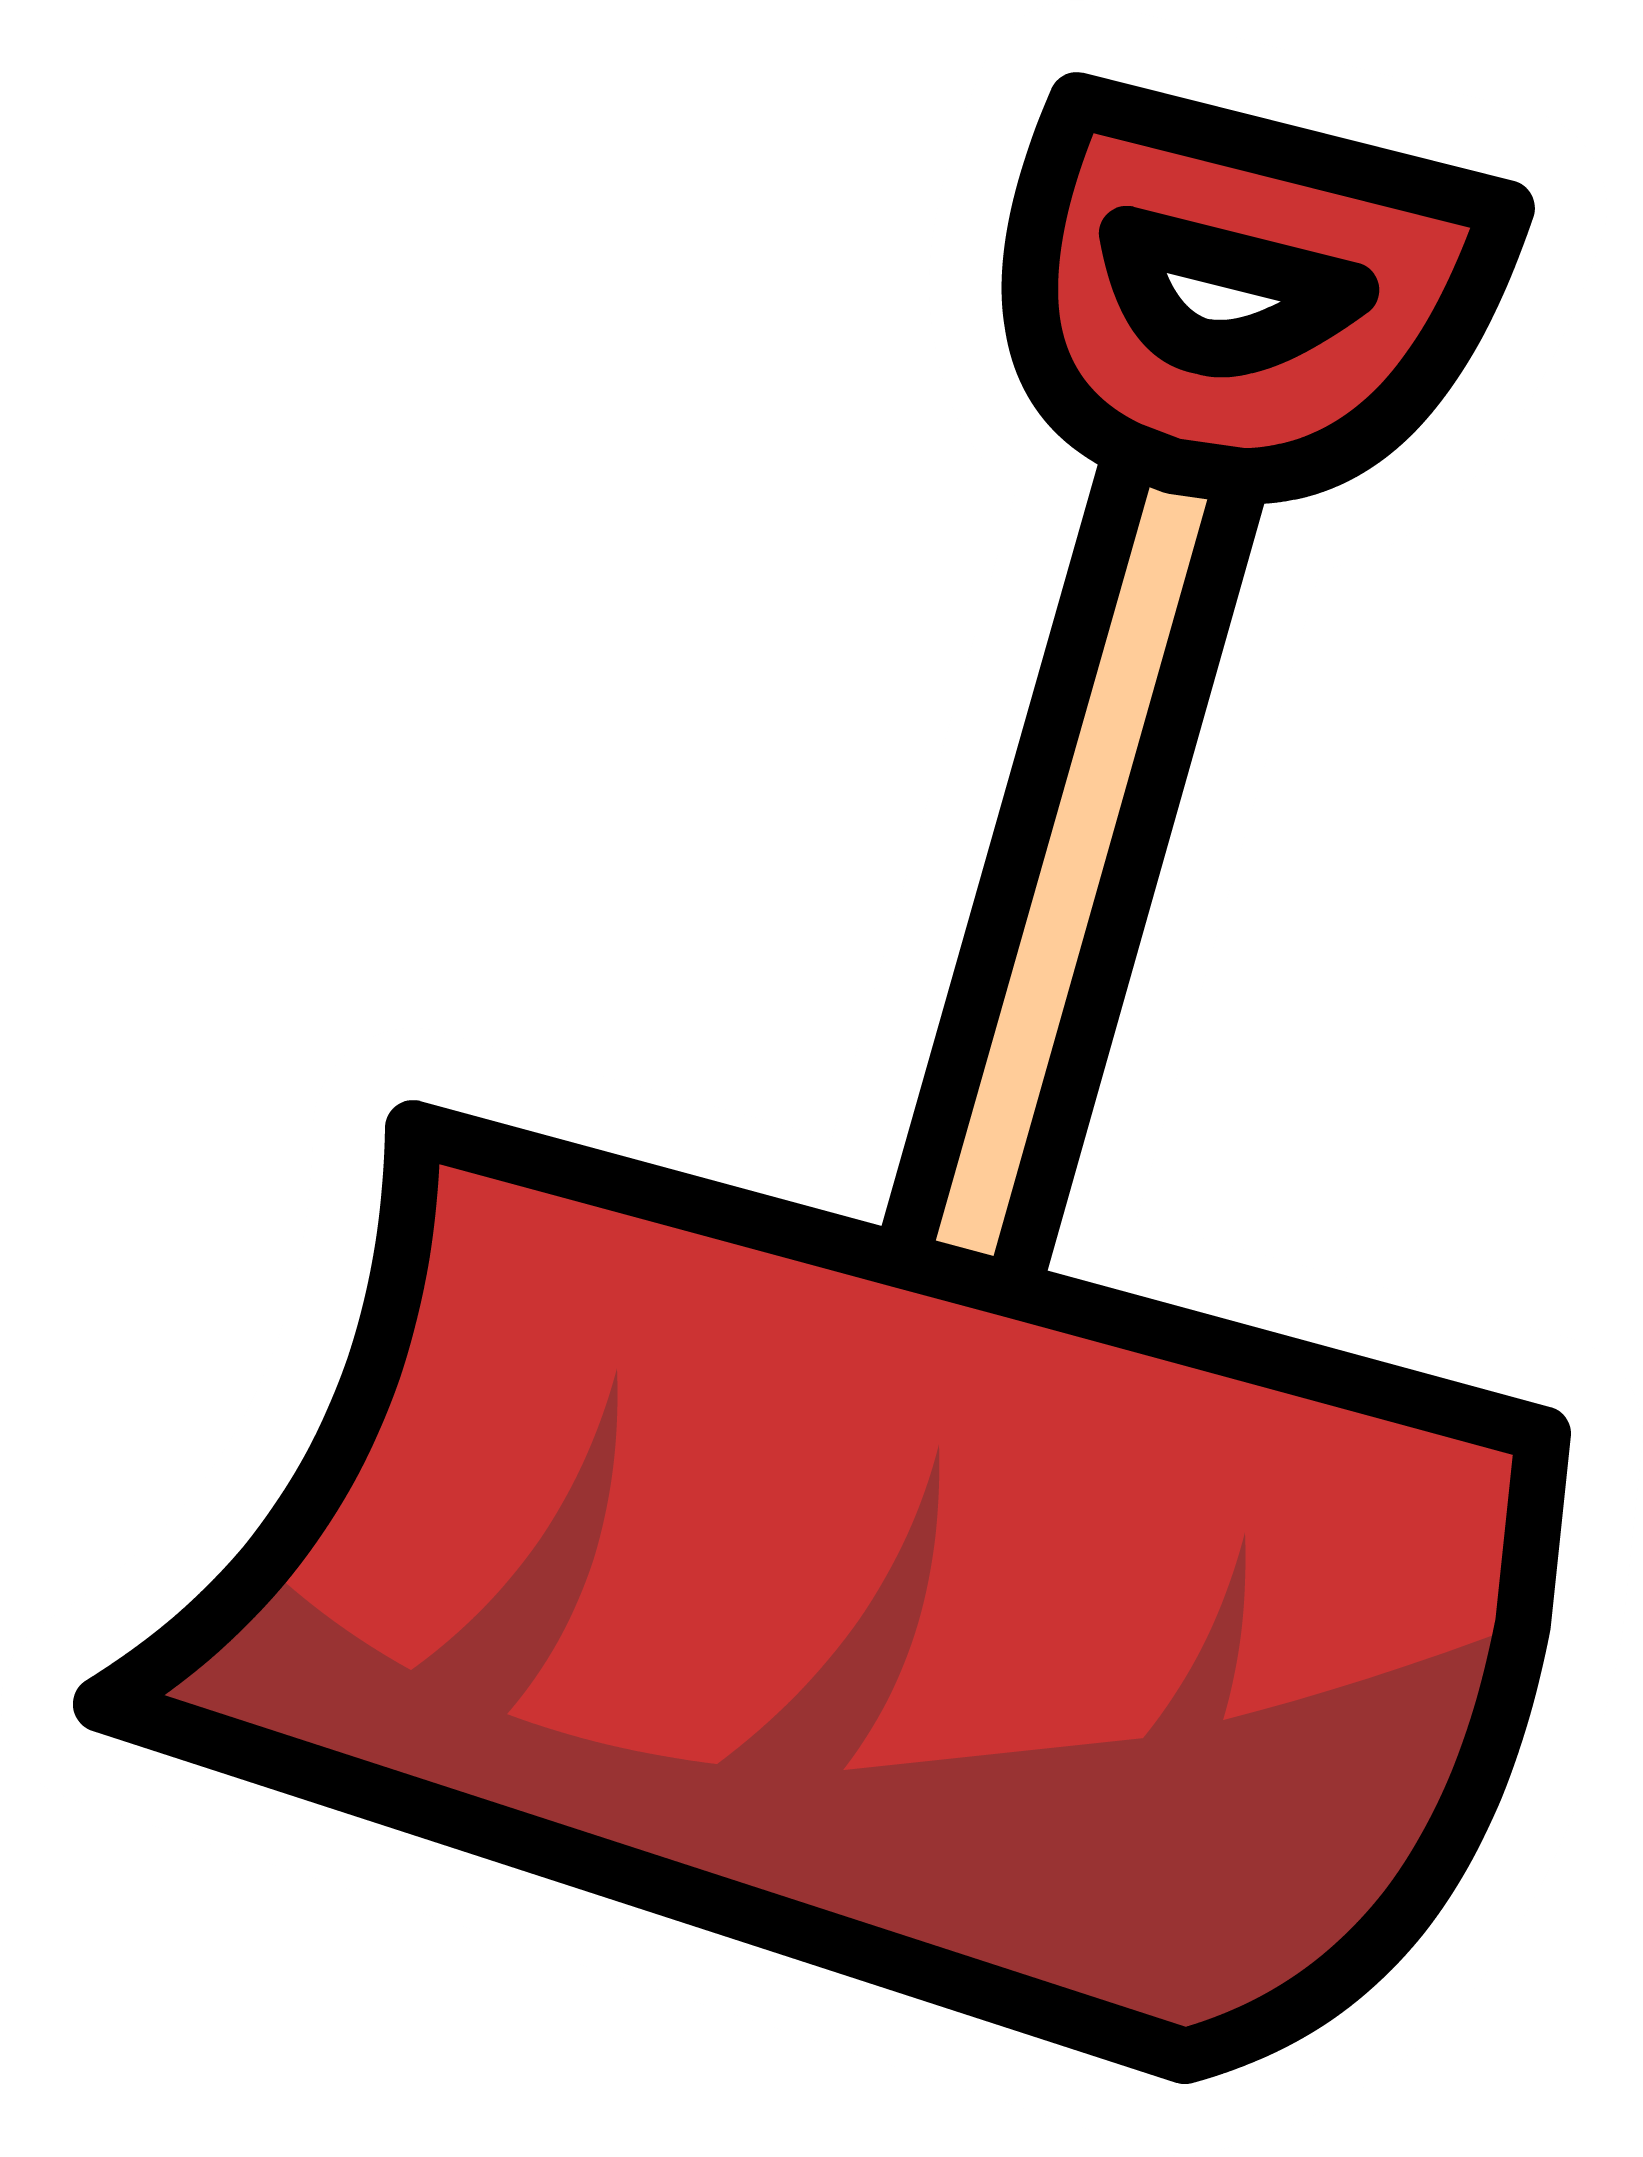 Red Snow Shovel Pin - Club Penguin Wiki - The free, editable ...